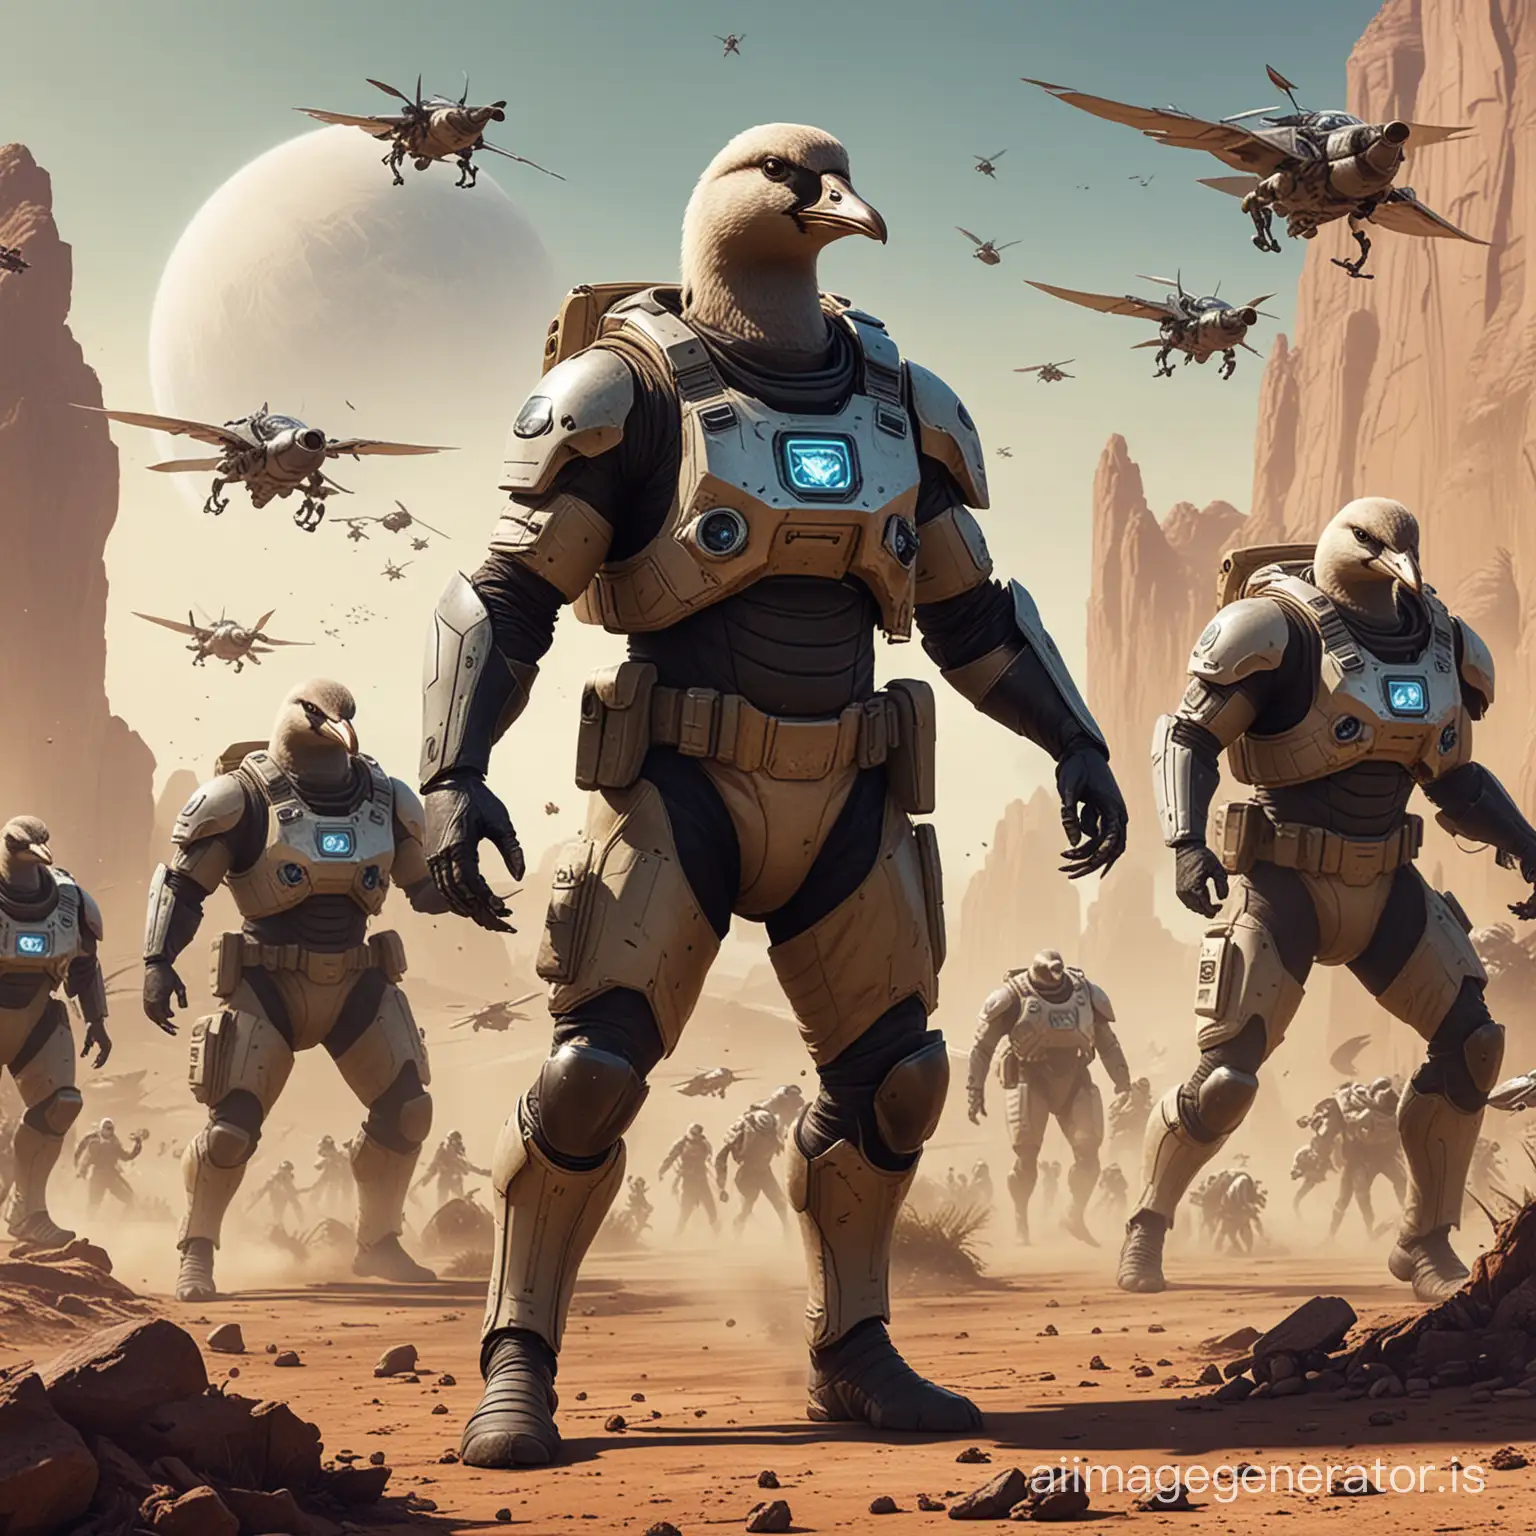 Intergalactic-Battle-Humanized-Geese-in-Combat-Suits-vs-Beetle-Warriors-on-Conquered-Planets